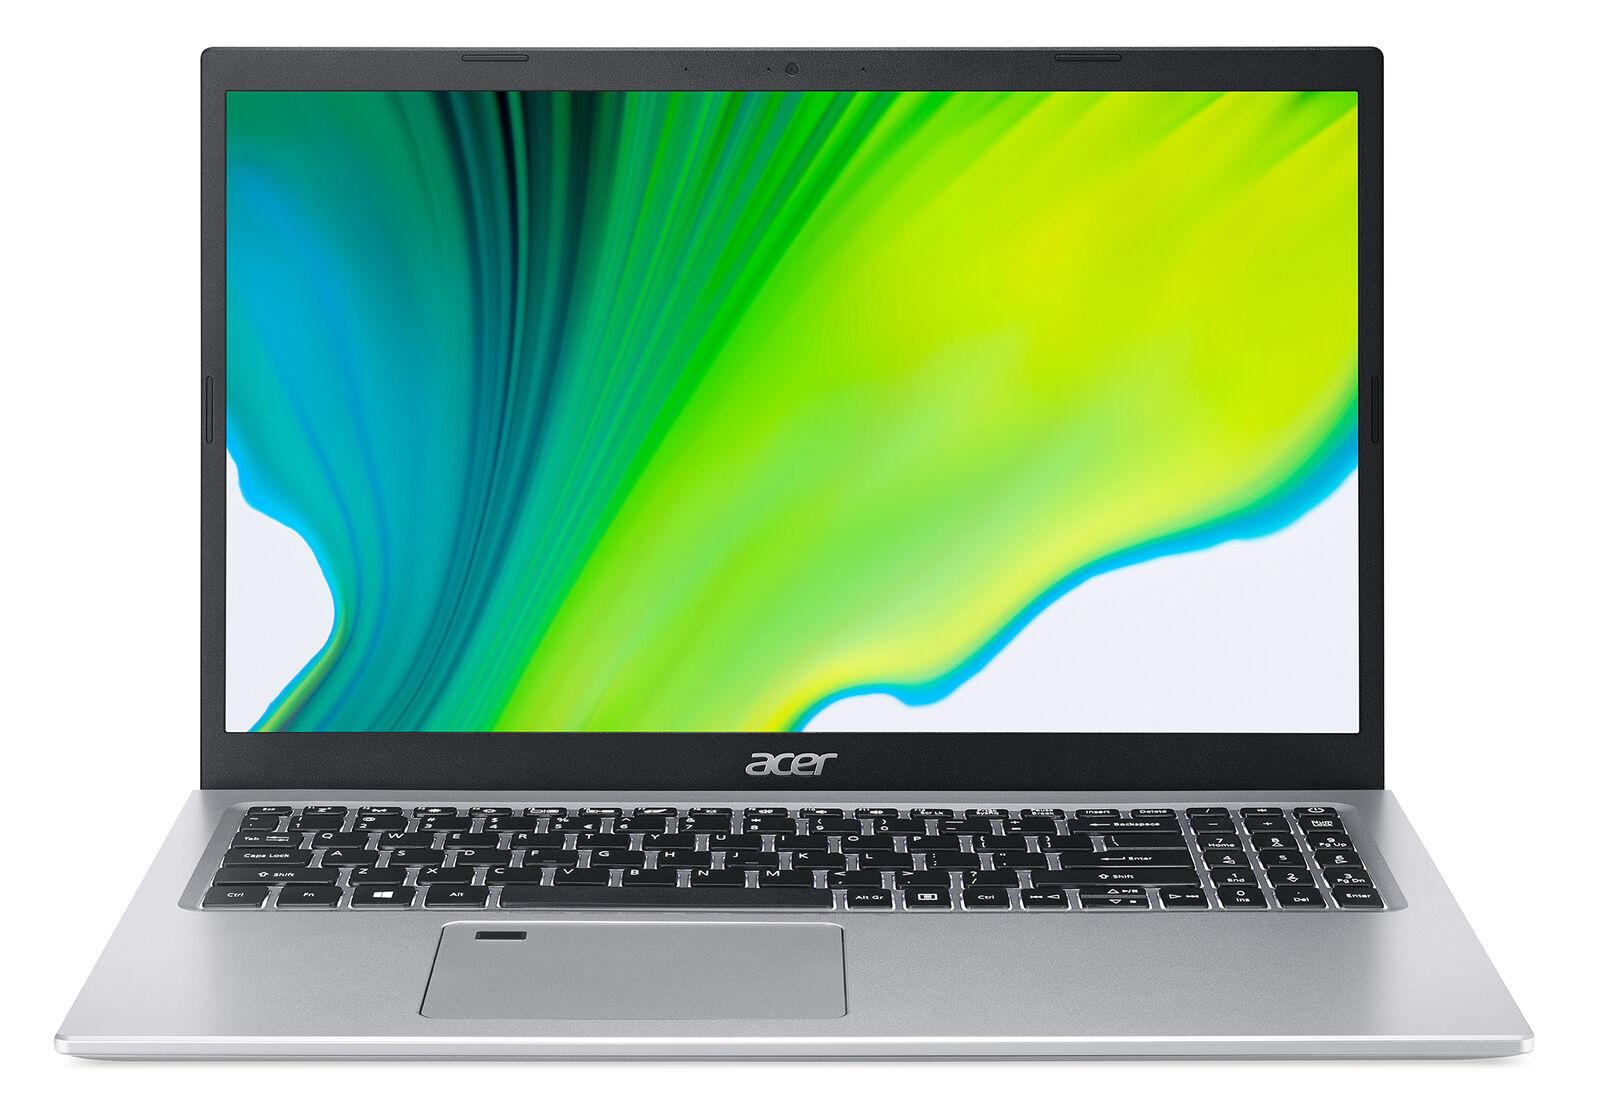 Acer Aspire 5 15.6in Ryzen 3 4GB 128GB Notebook Laptop for $193.59 Shipped